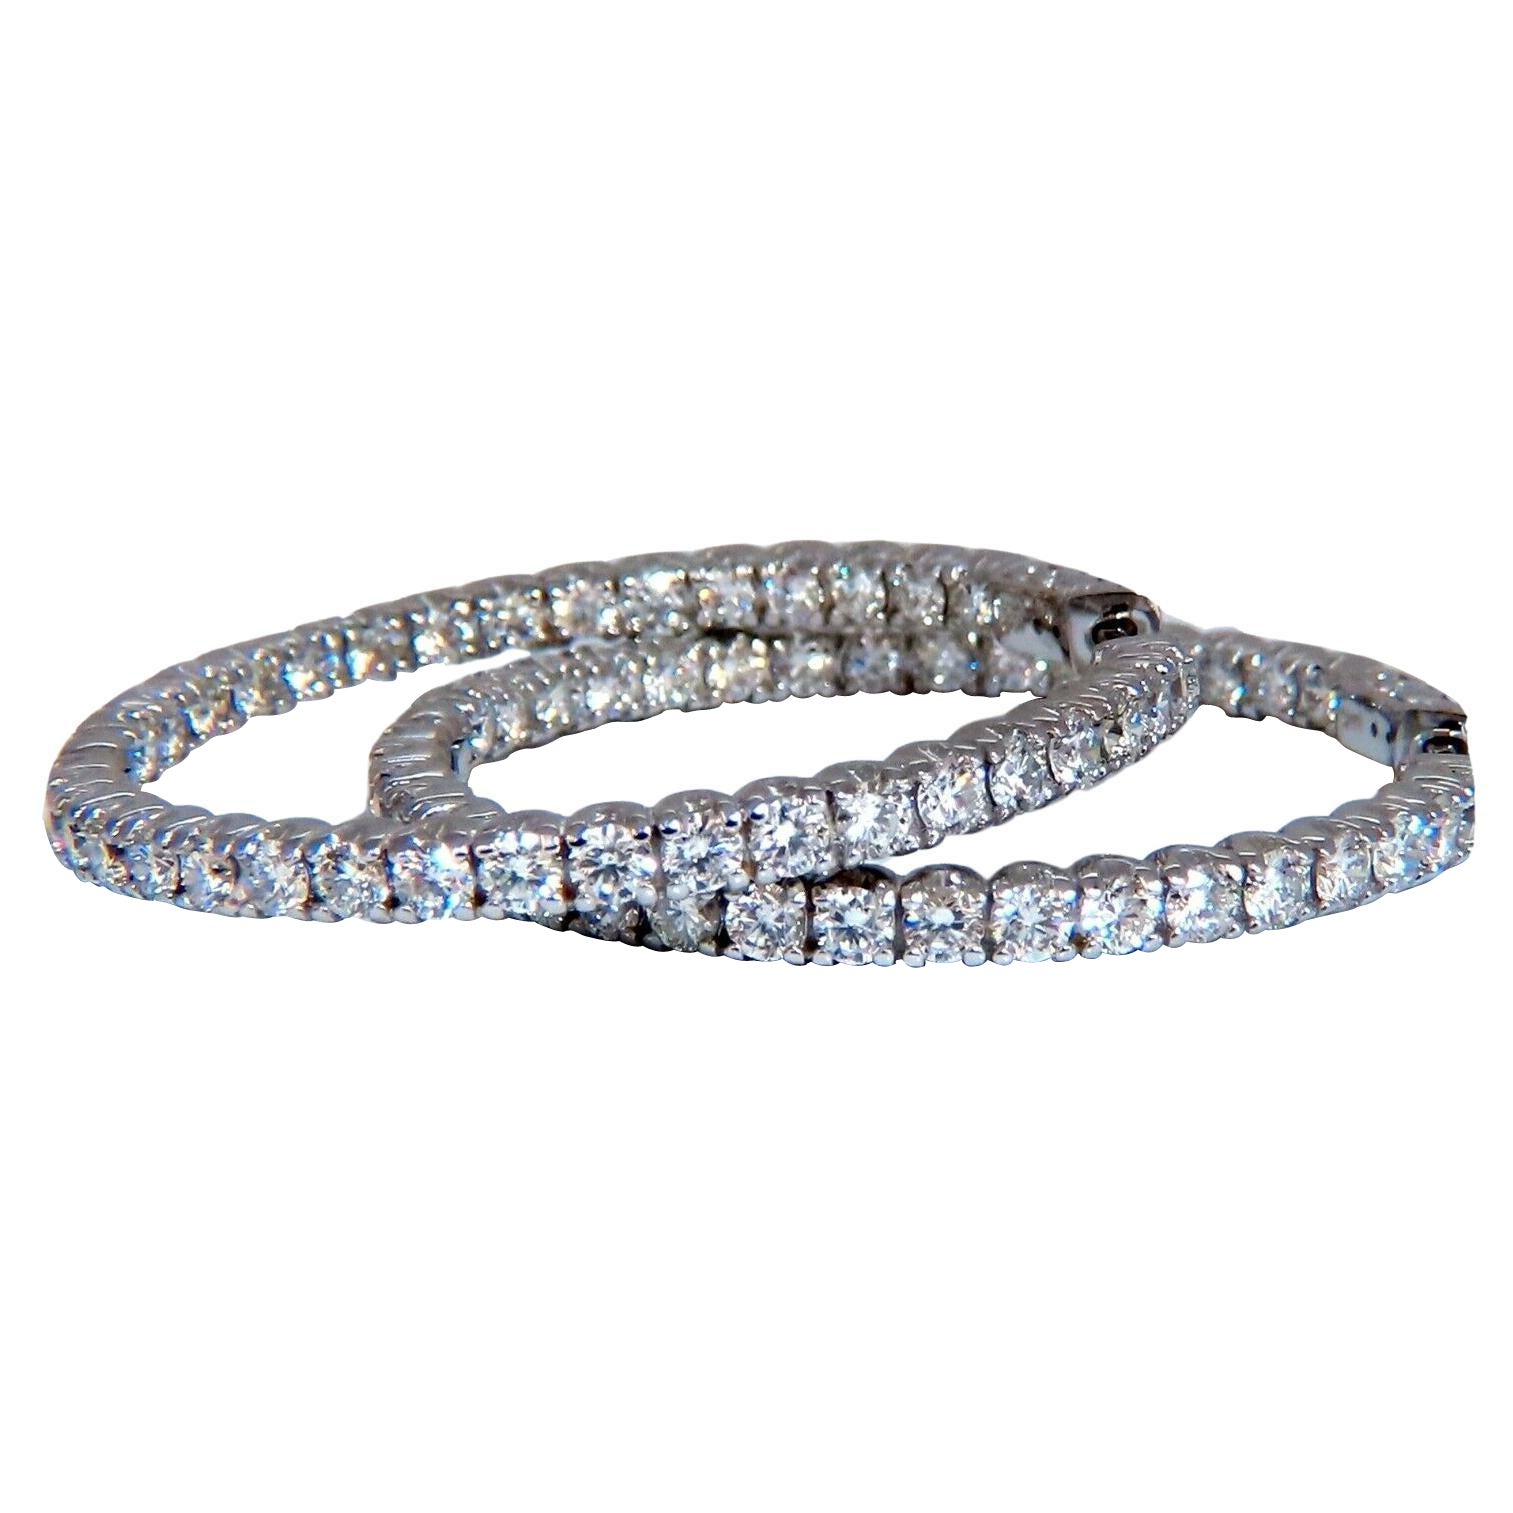 3.90ct Natural Round Diamond Circle Hoop Earrings 14kt Share Prong